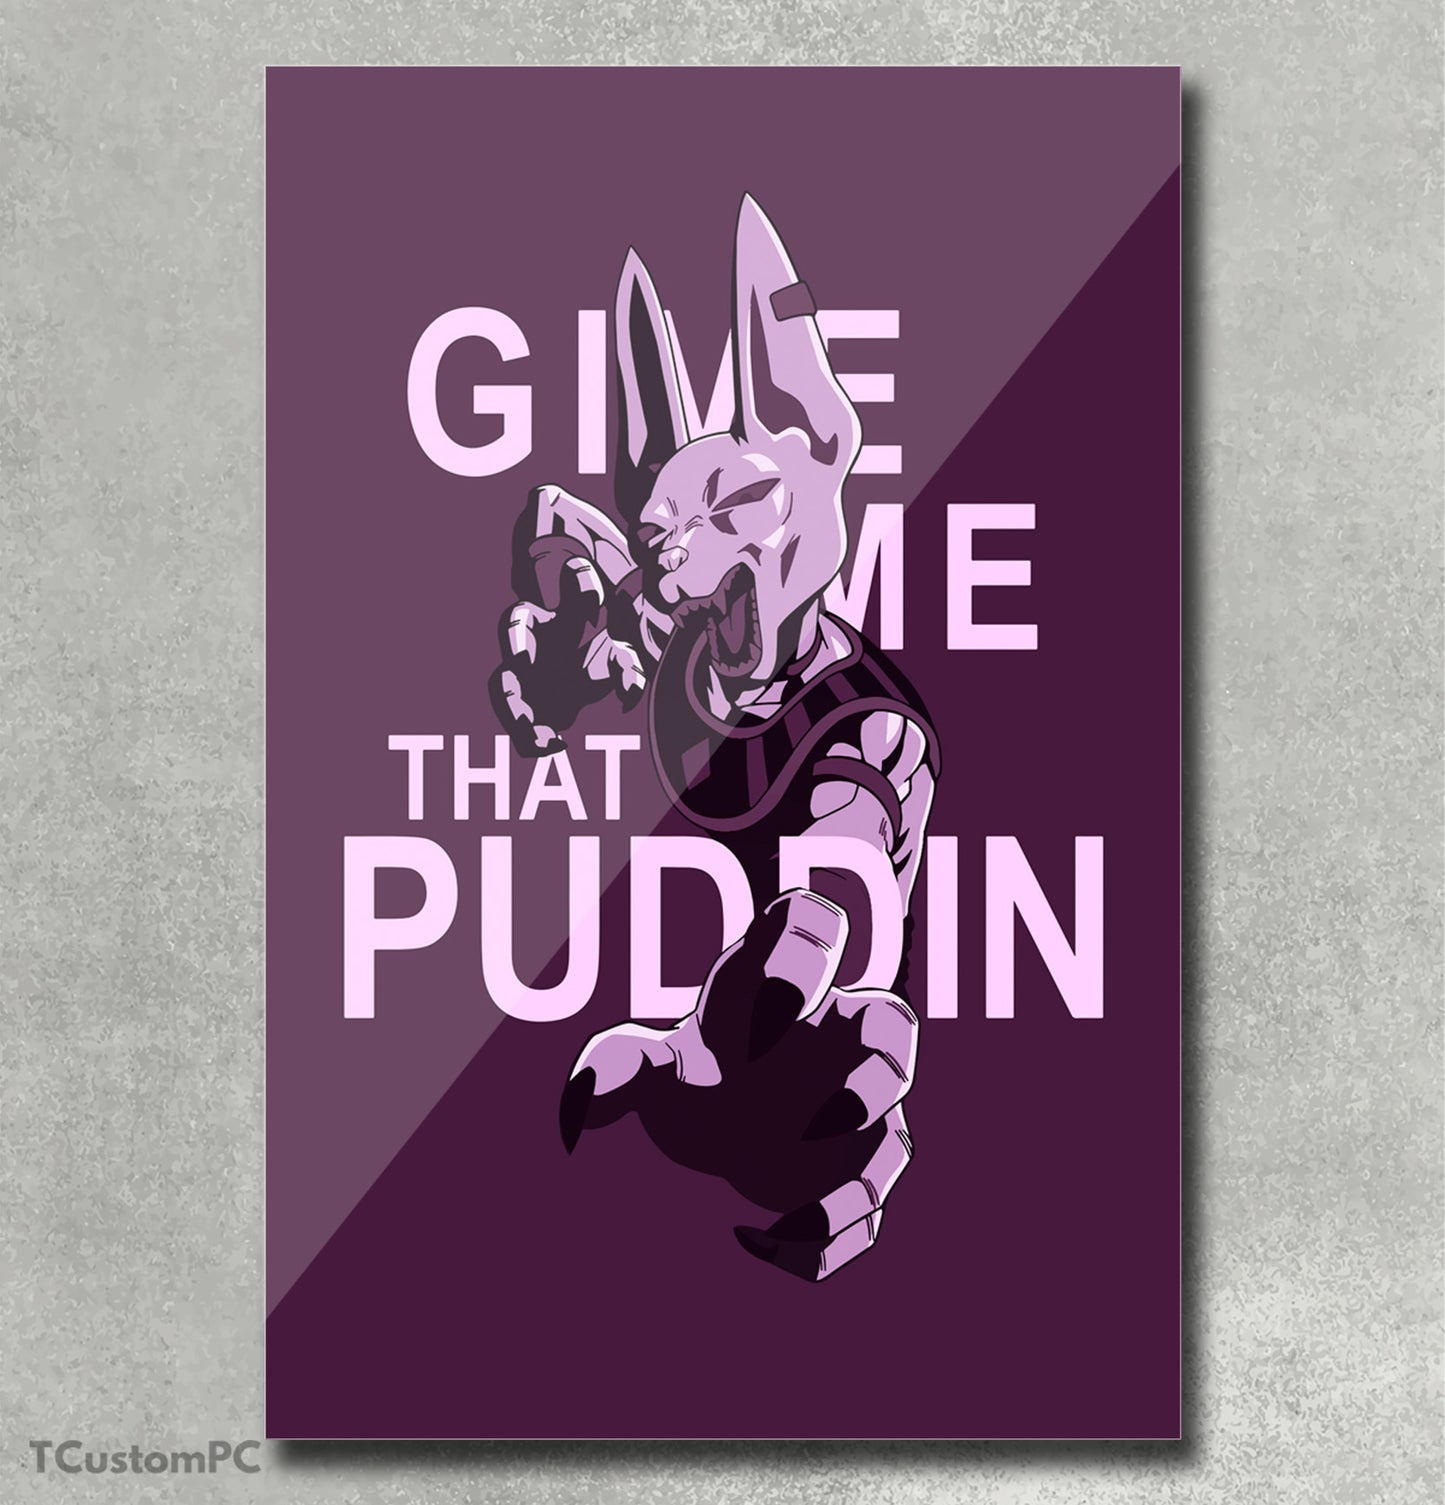 Dragon Ball painting "Gimme that pudding vector"